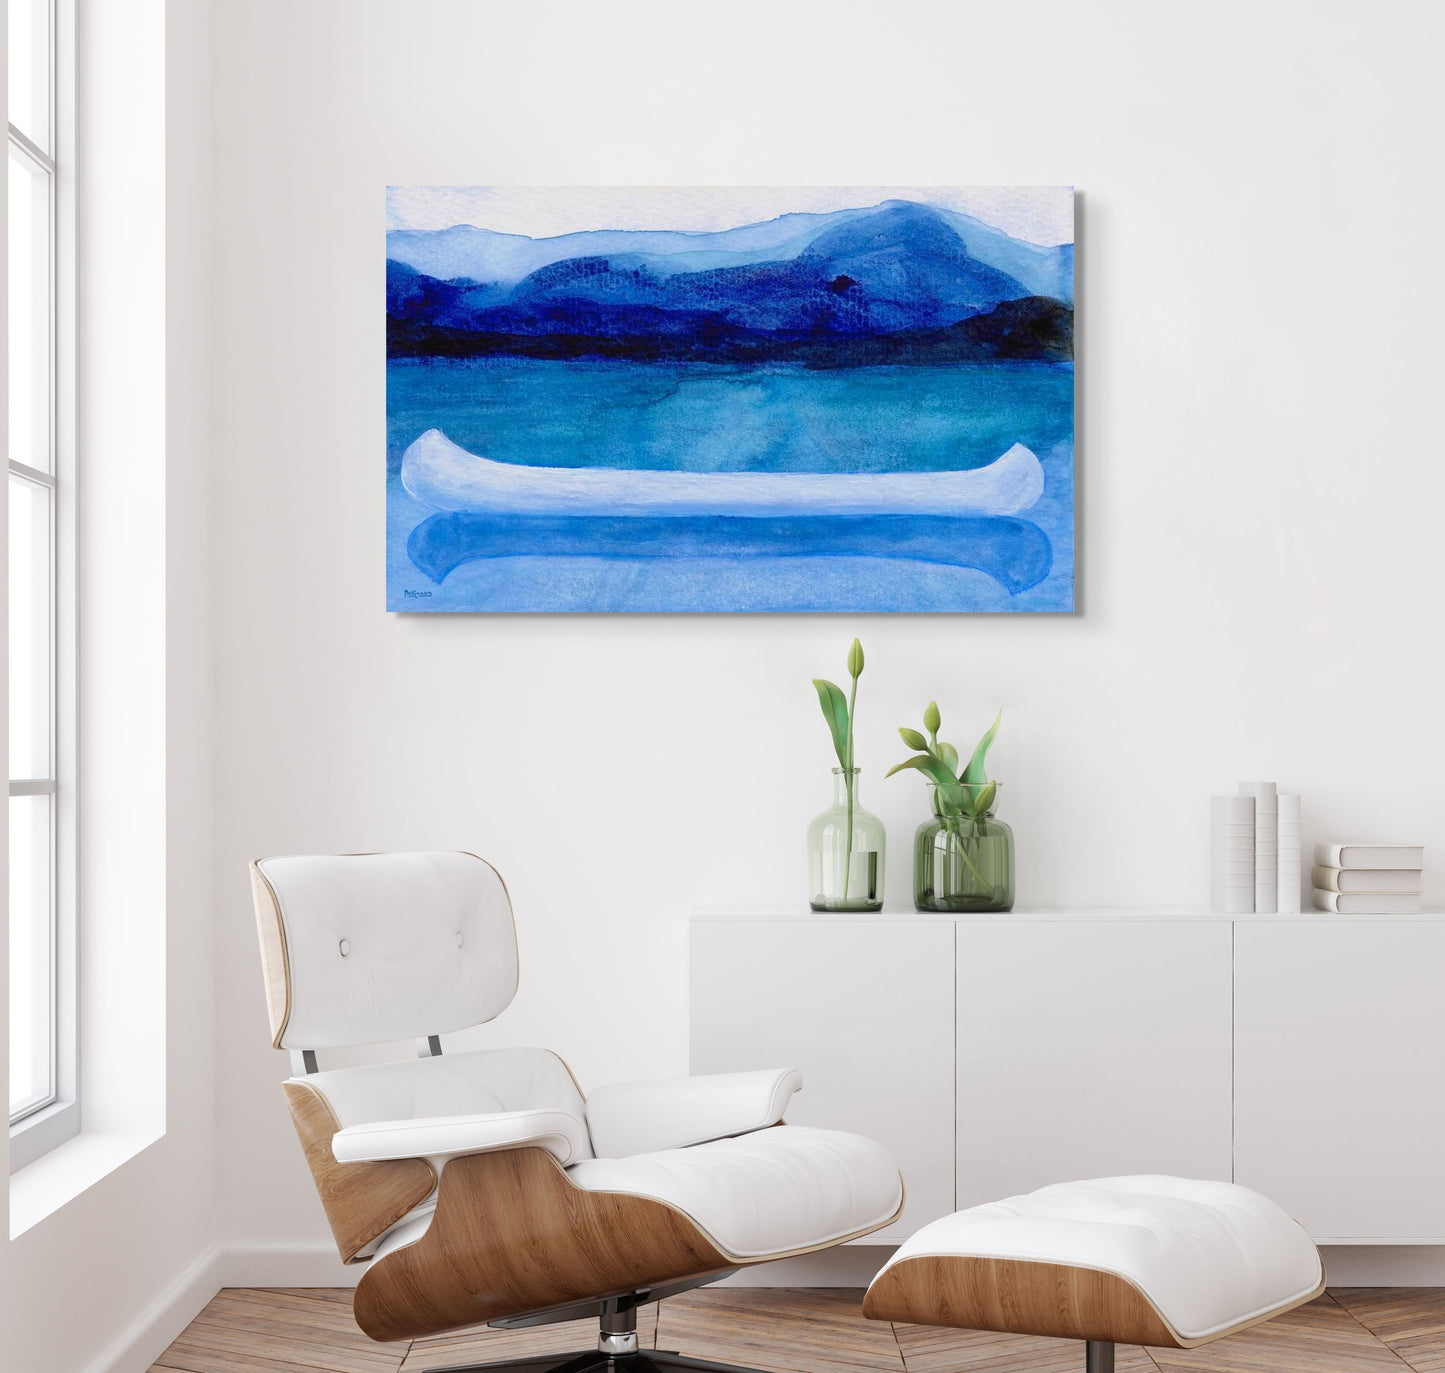 A work of canoeing art by Canadian artist Catherine McKinnon. The watercolor depicts a small white boat, a "canoe", on blue water with a dark blue distant shore and lighter blue distant moutains. The giclee print is frameless and is mounted on a white wall above a stylish, contemporary white lounging chair with natural wood structure.